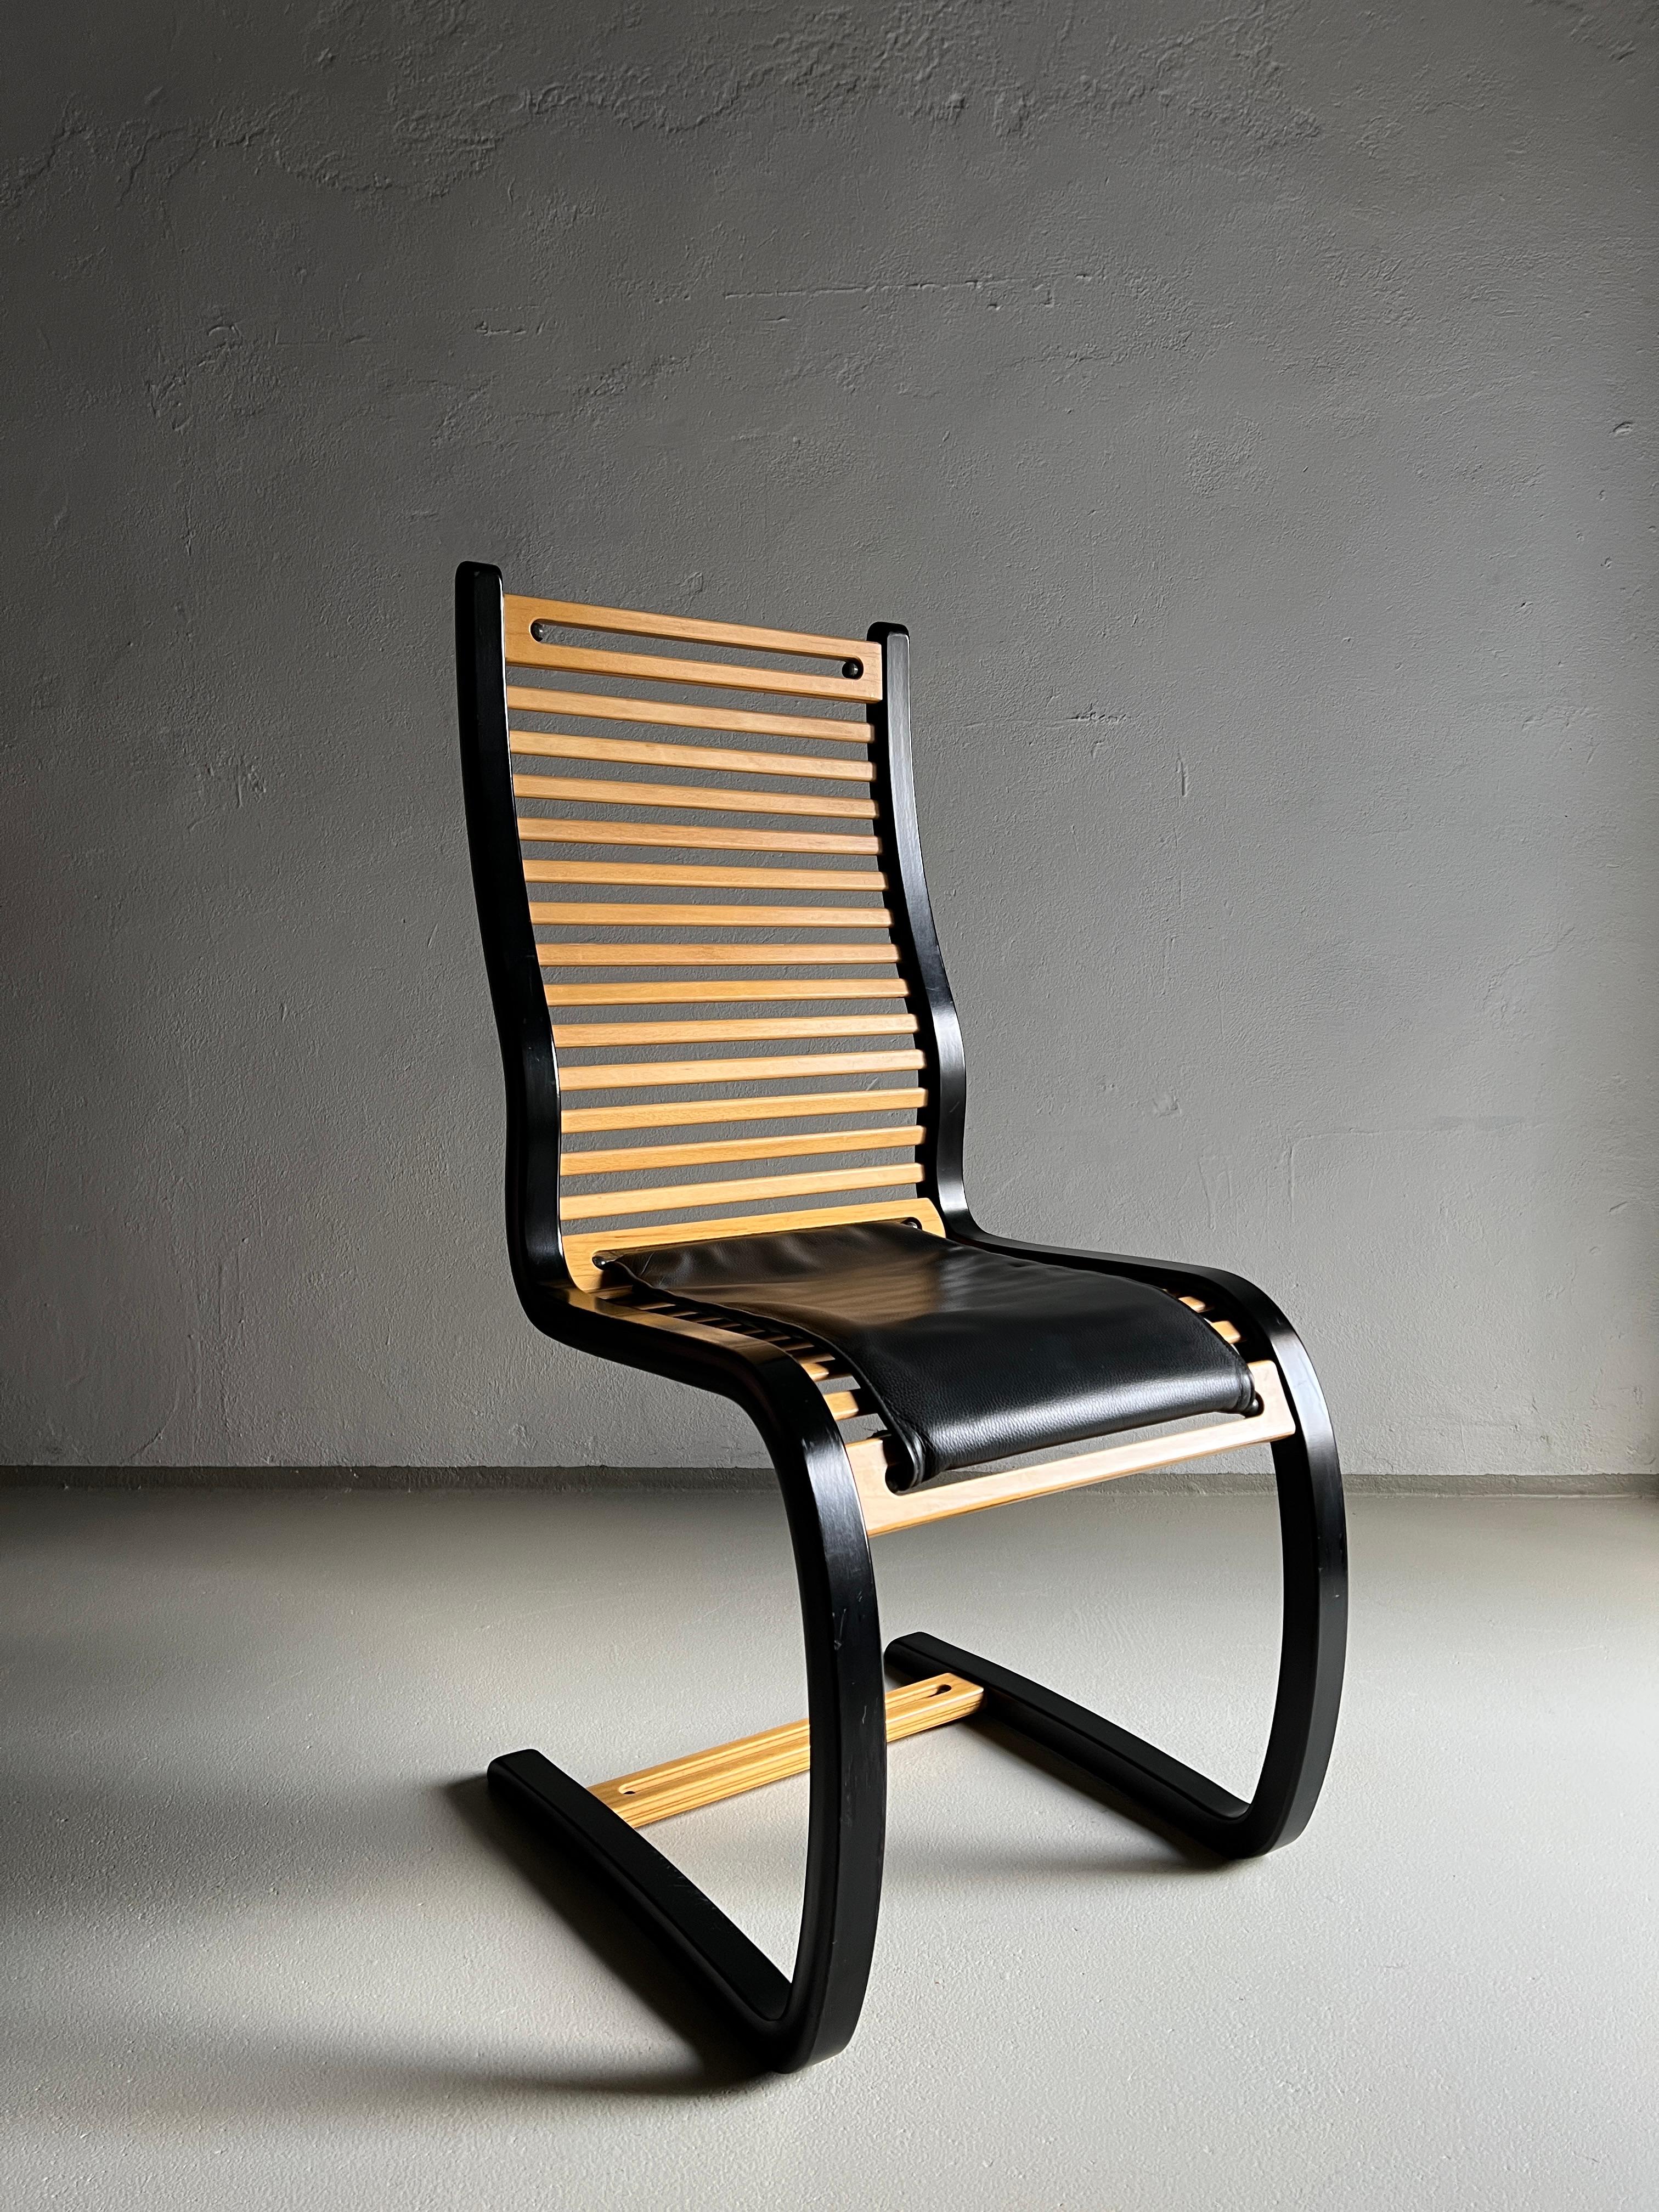 This “Spring“ chair was designed by Terje Hope in 1984 and produced by Møremøbler A / S. It’s made of laminated wood with an anatomical shape, zip leather seat cushion included. Minimalist design with big attention to detail. There’re rubber lines